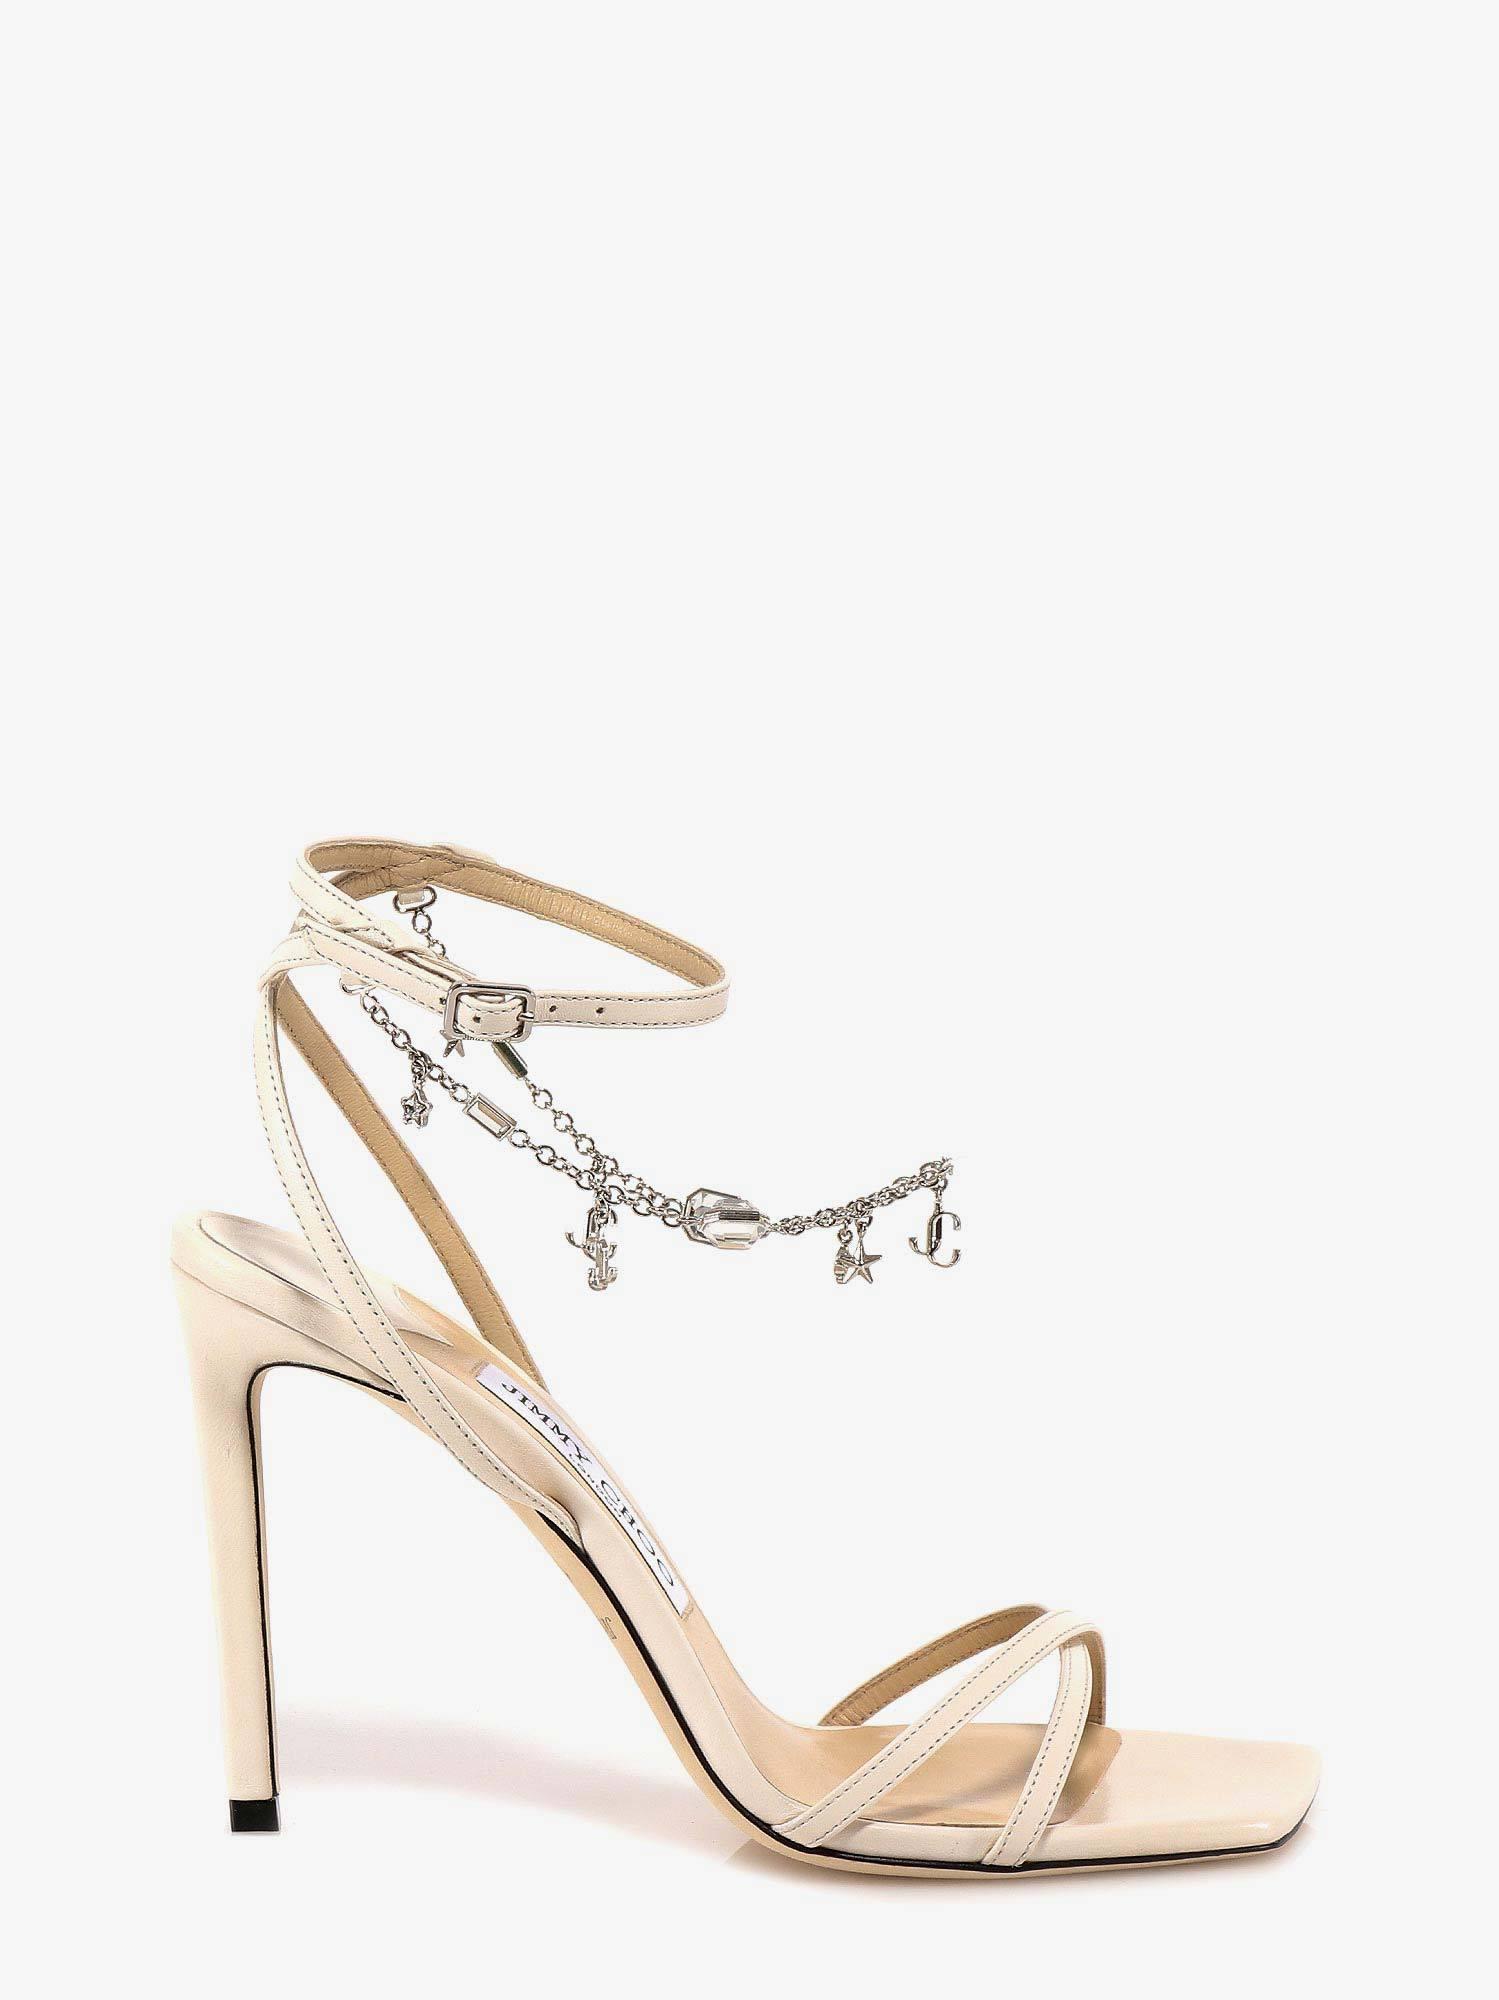 Jimmy Choo Metz 100 Leather Sandals in White | Lyst